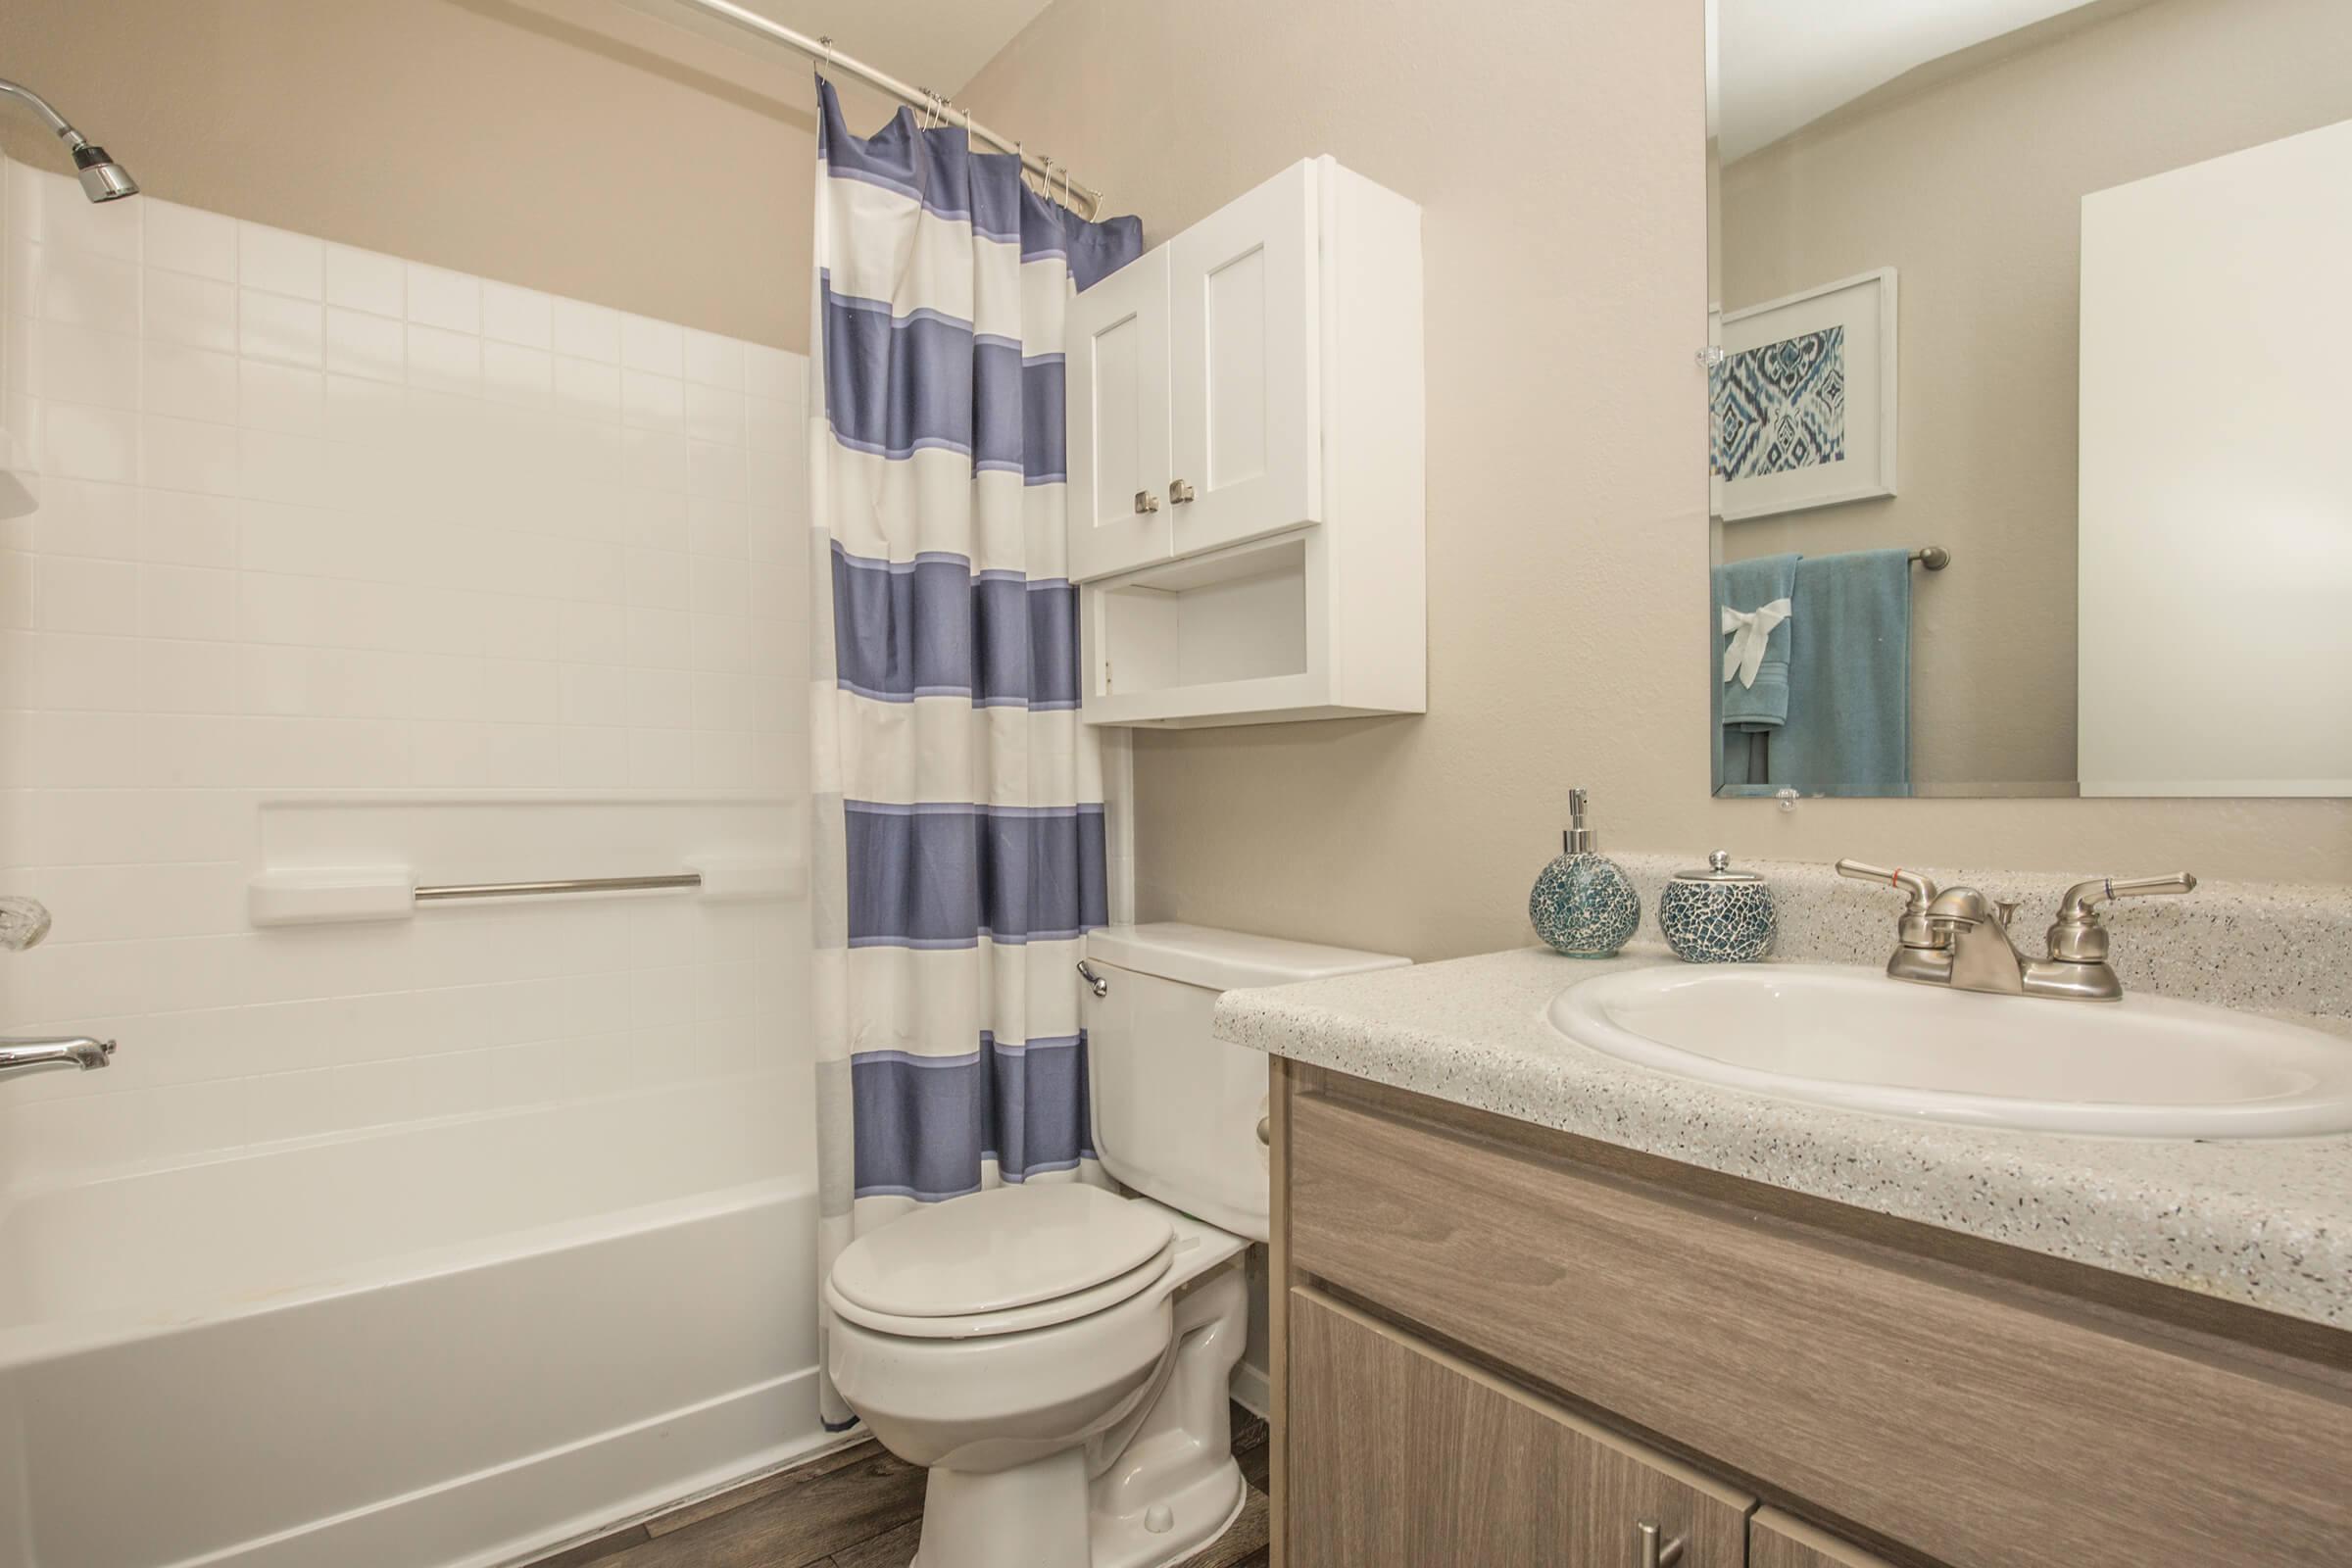 Sunset Hills has beautiful bathrooms with plenty of cabinet space